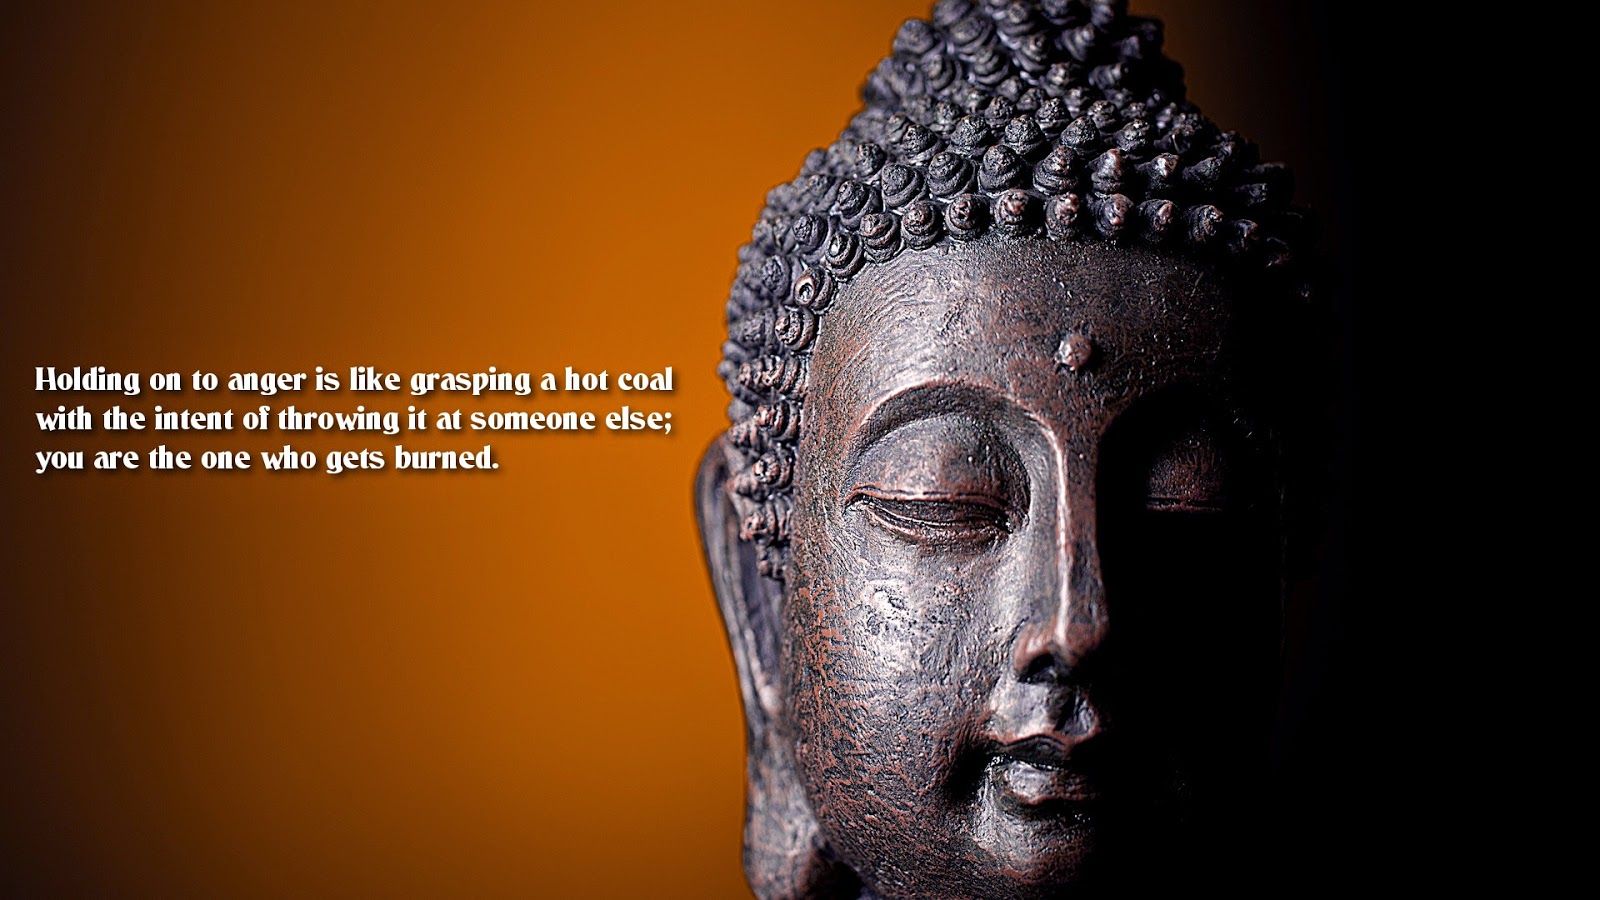 Buddha wallpapers with quotes on life and happiness HD pictures